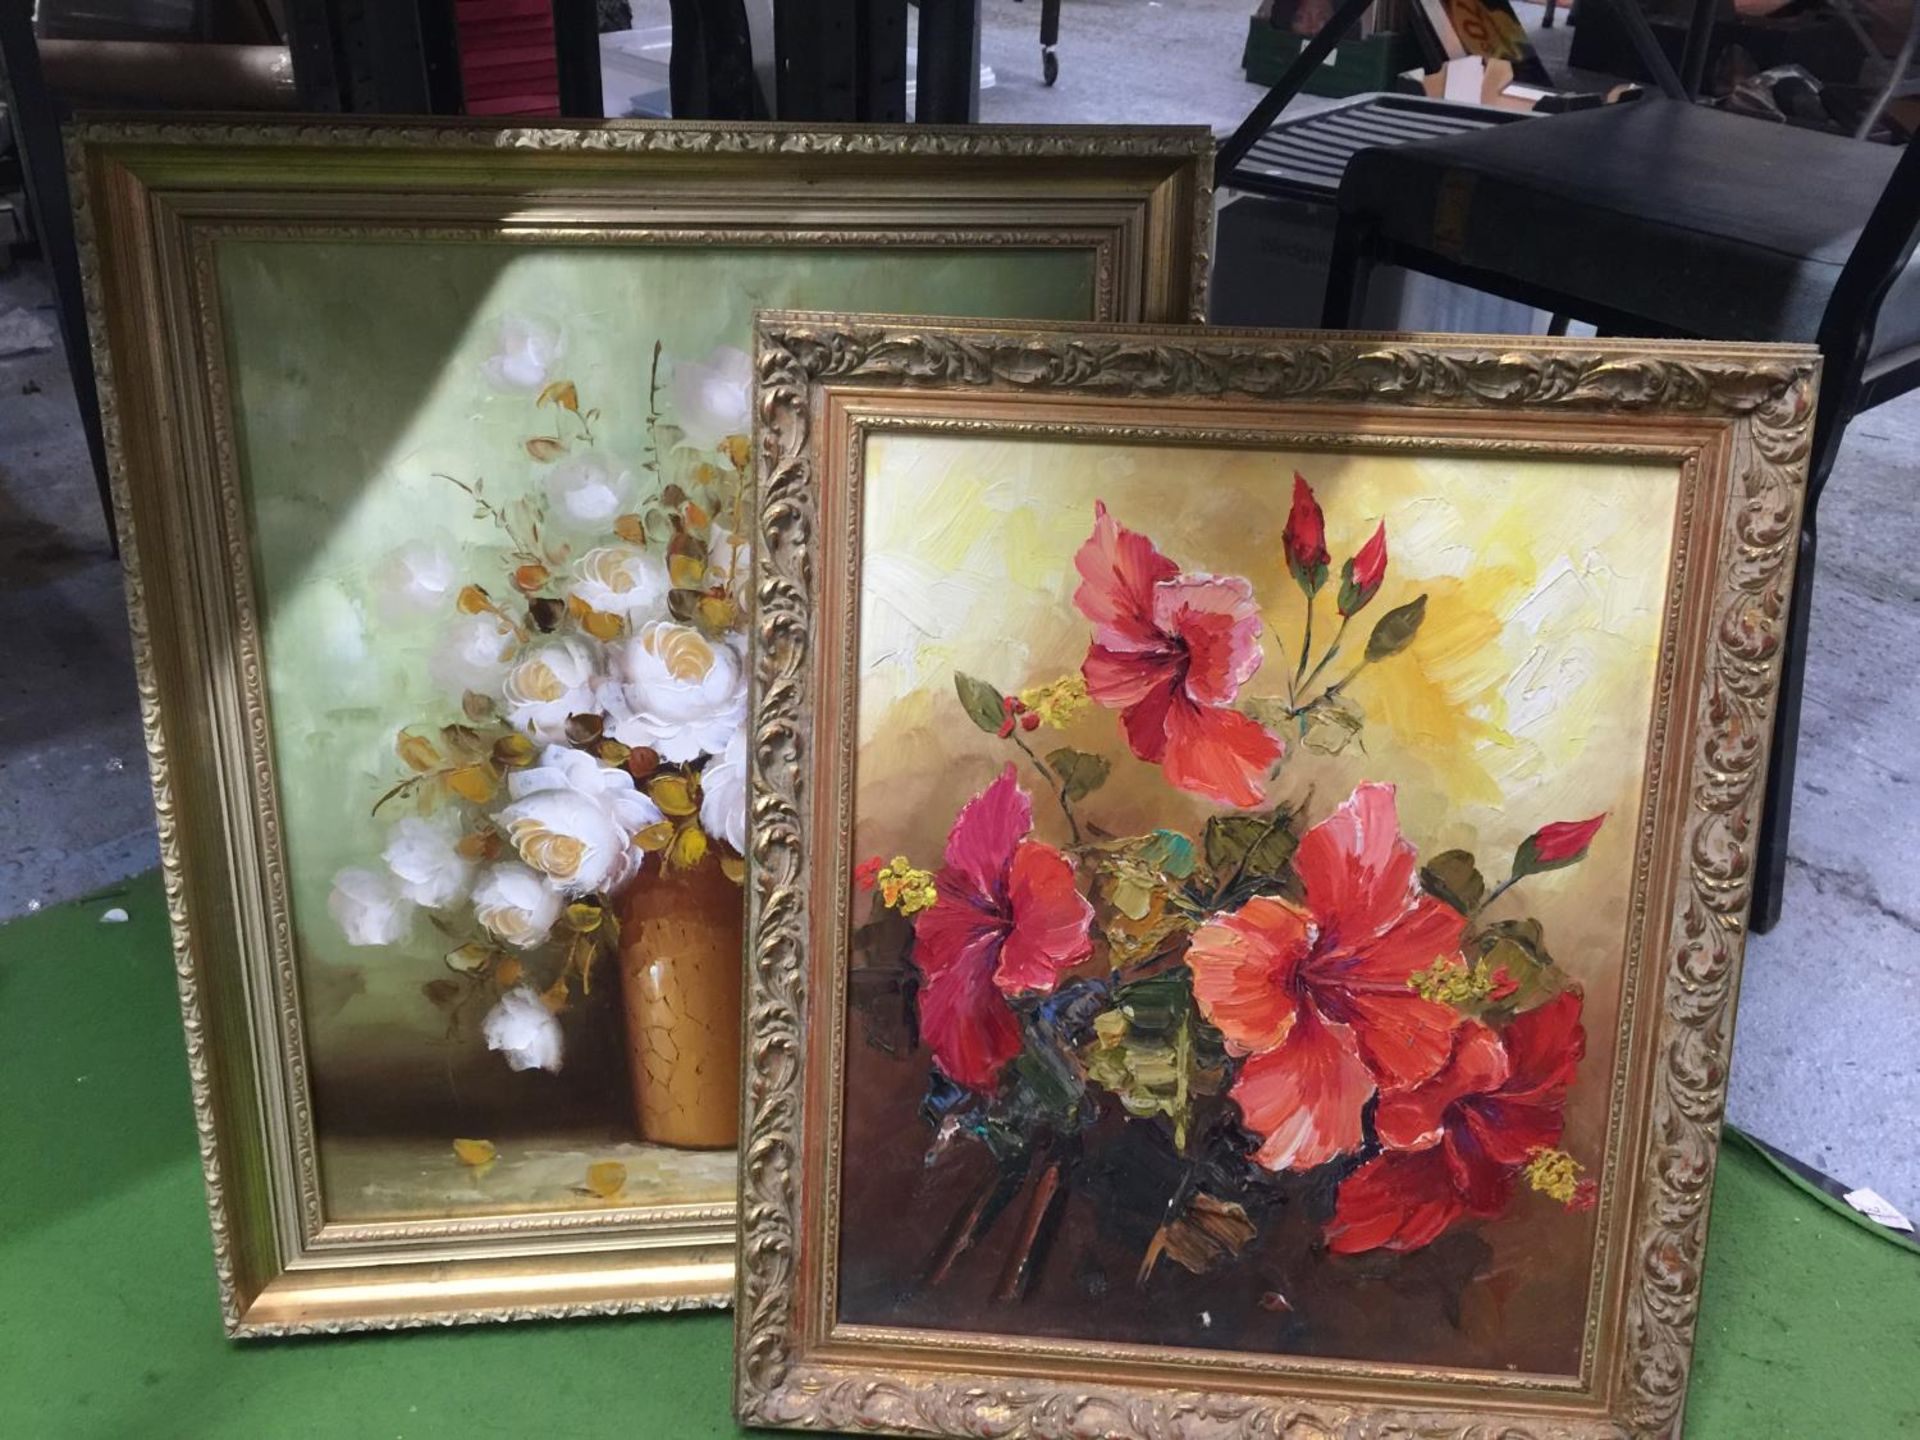 TWO GILT FRAMED OIL ON CANVAS STILL LIFE PAINTINGS ONE WITH THE SIGNATURE 'CHIALINE'